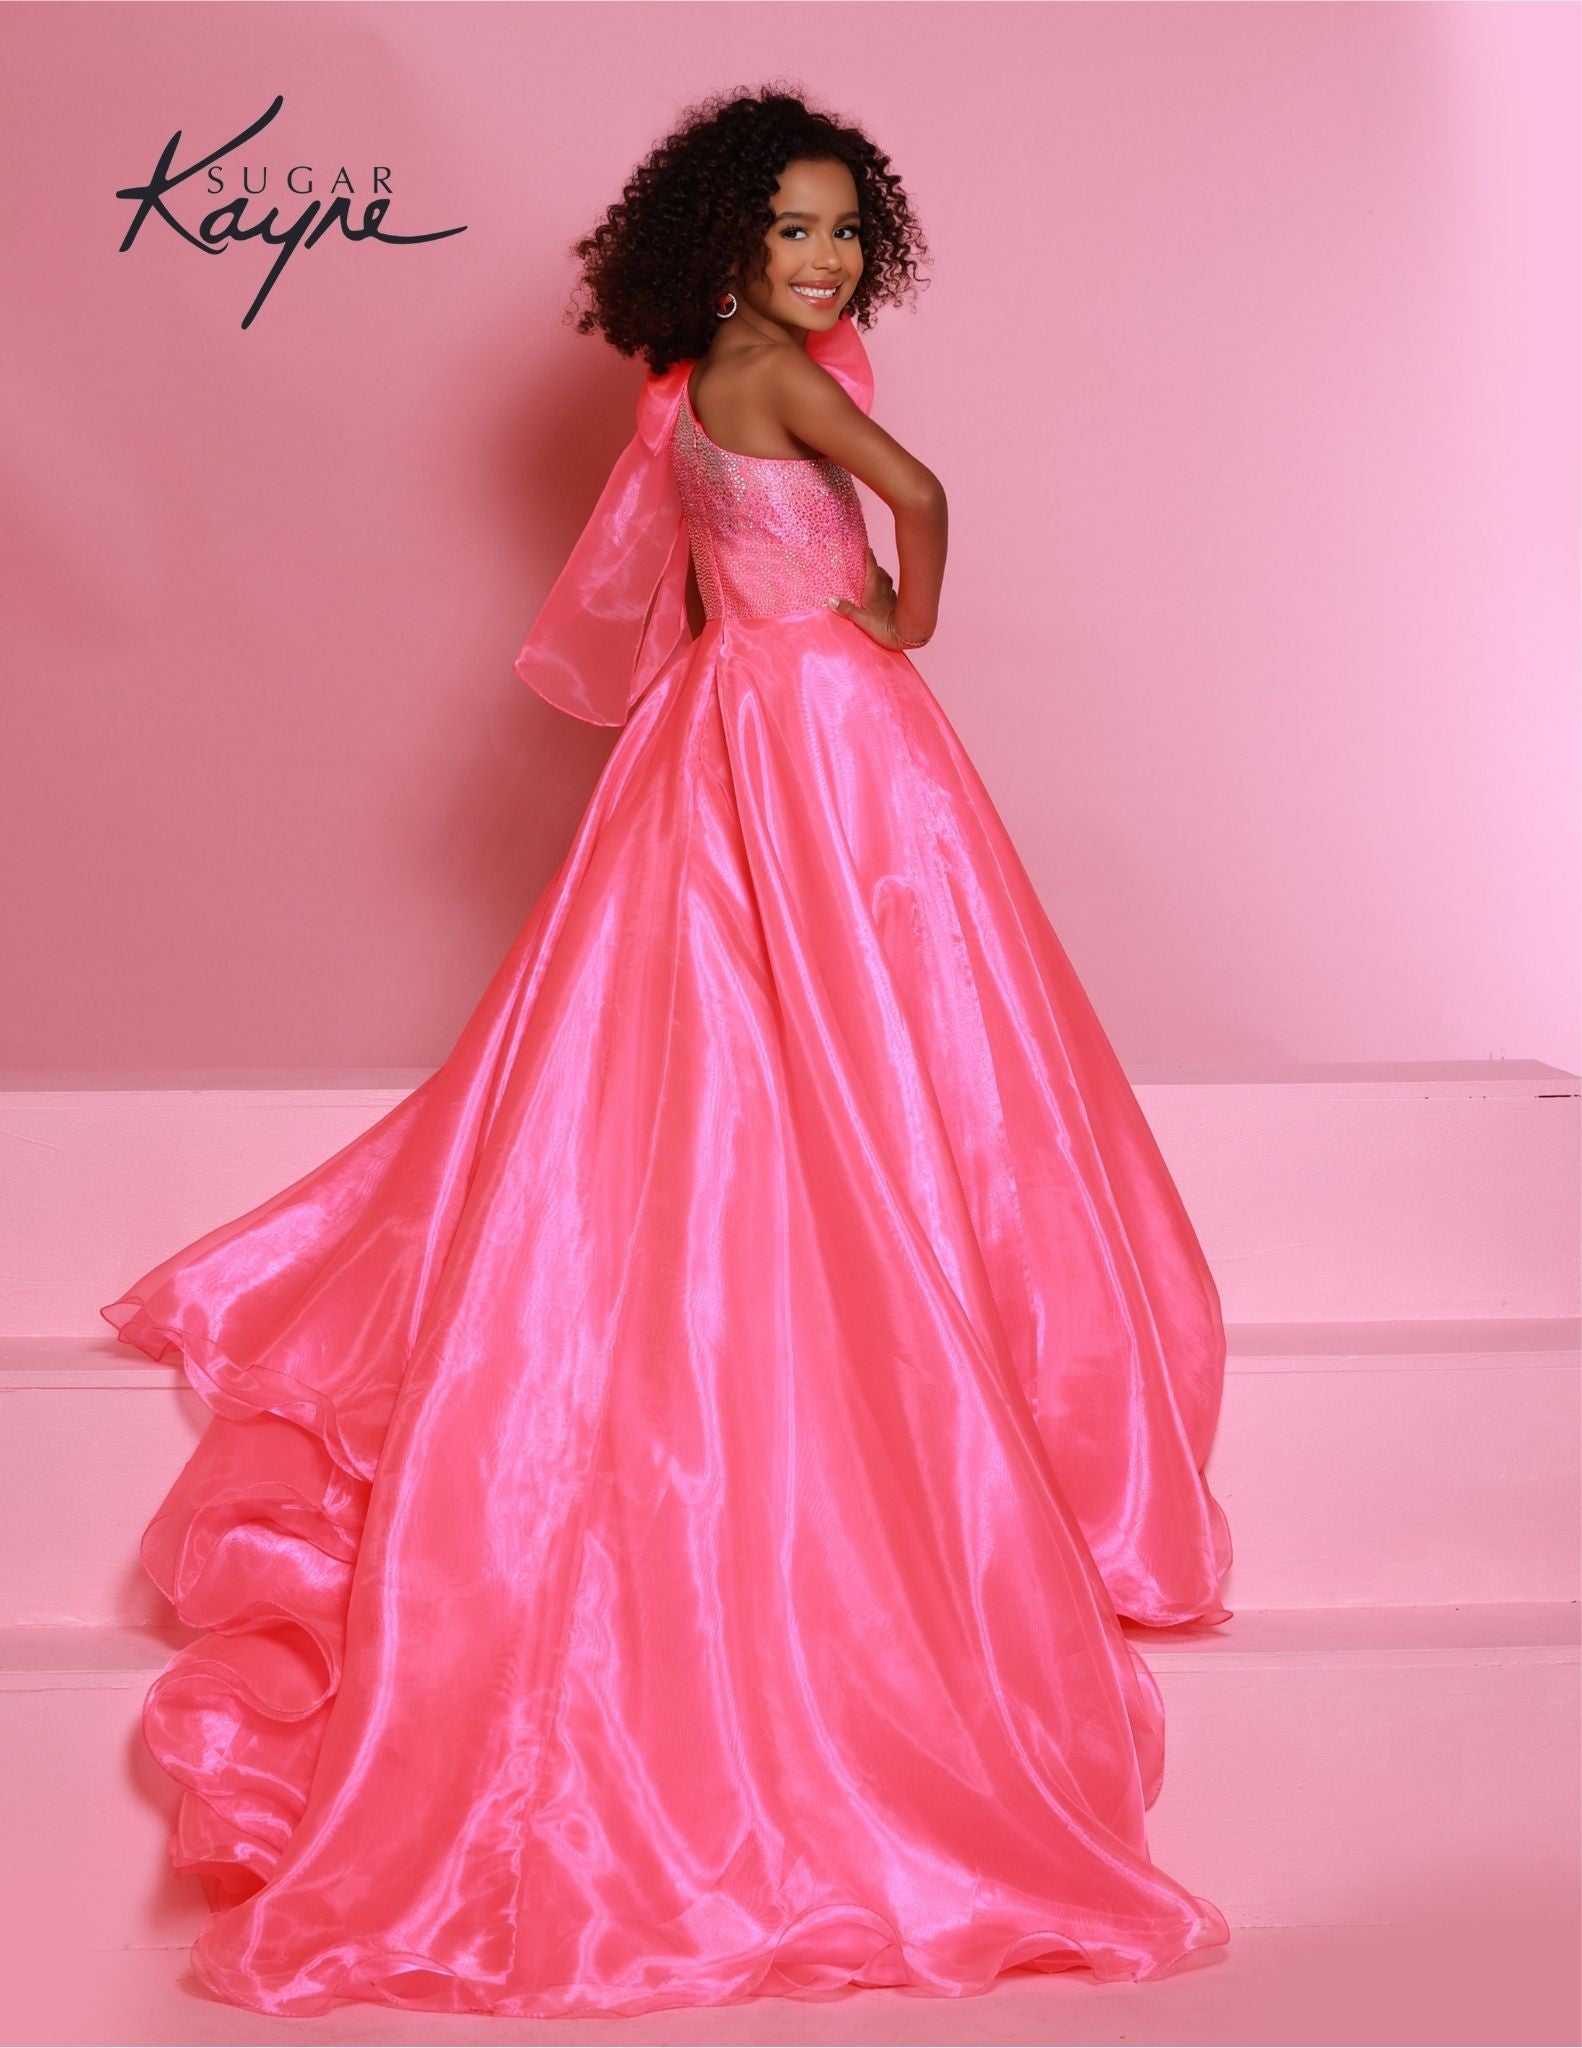 Sugar Kayne C310 Neon Pink Girls and Preteens Pageant Dress Preteens Gown One Shoulder Bow back